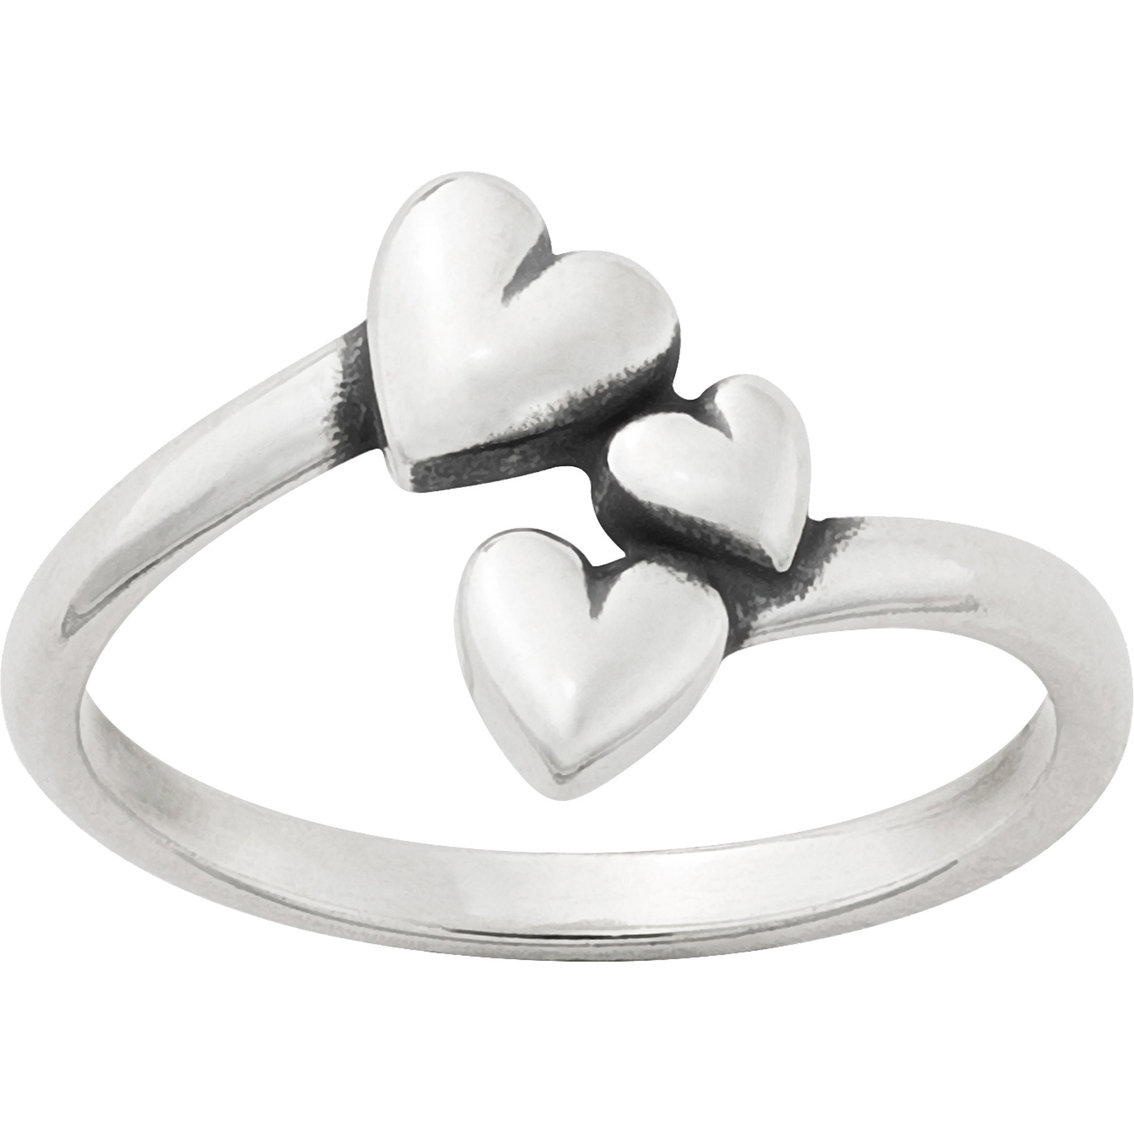 James Avery Gathered Hearts Ring | Silver Rings | Jewelry & Watches ...